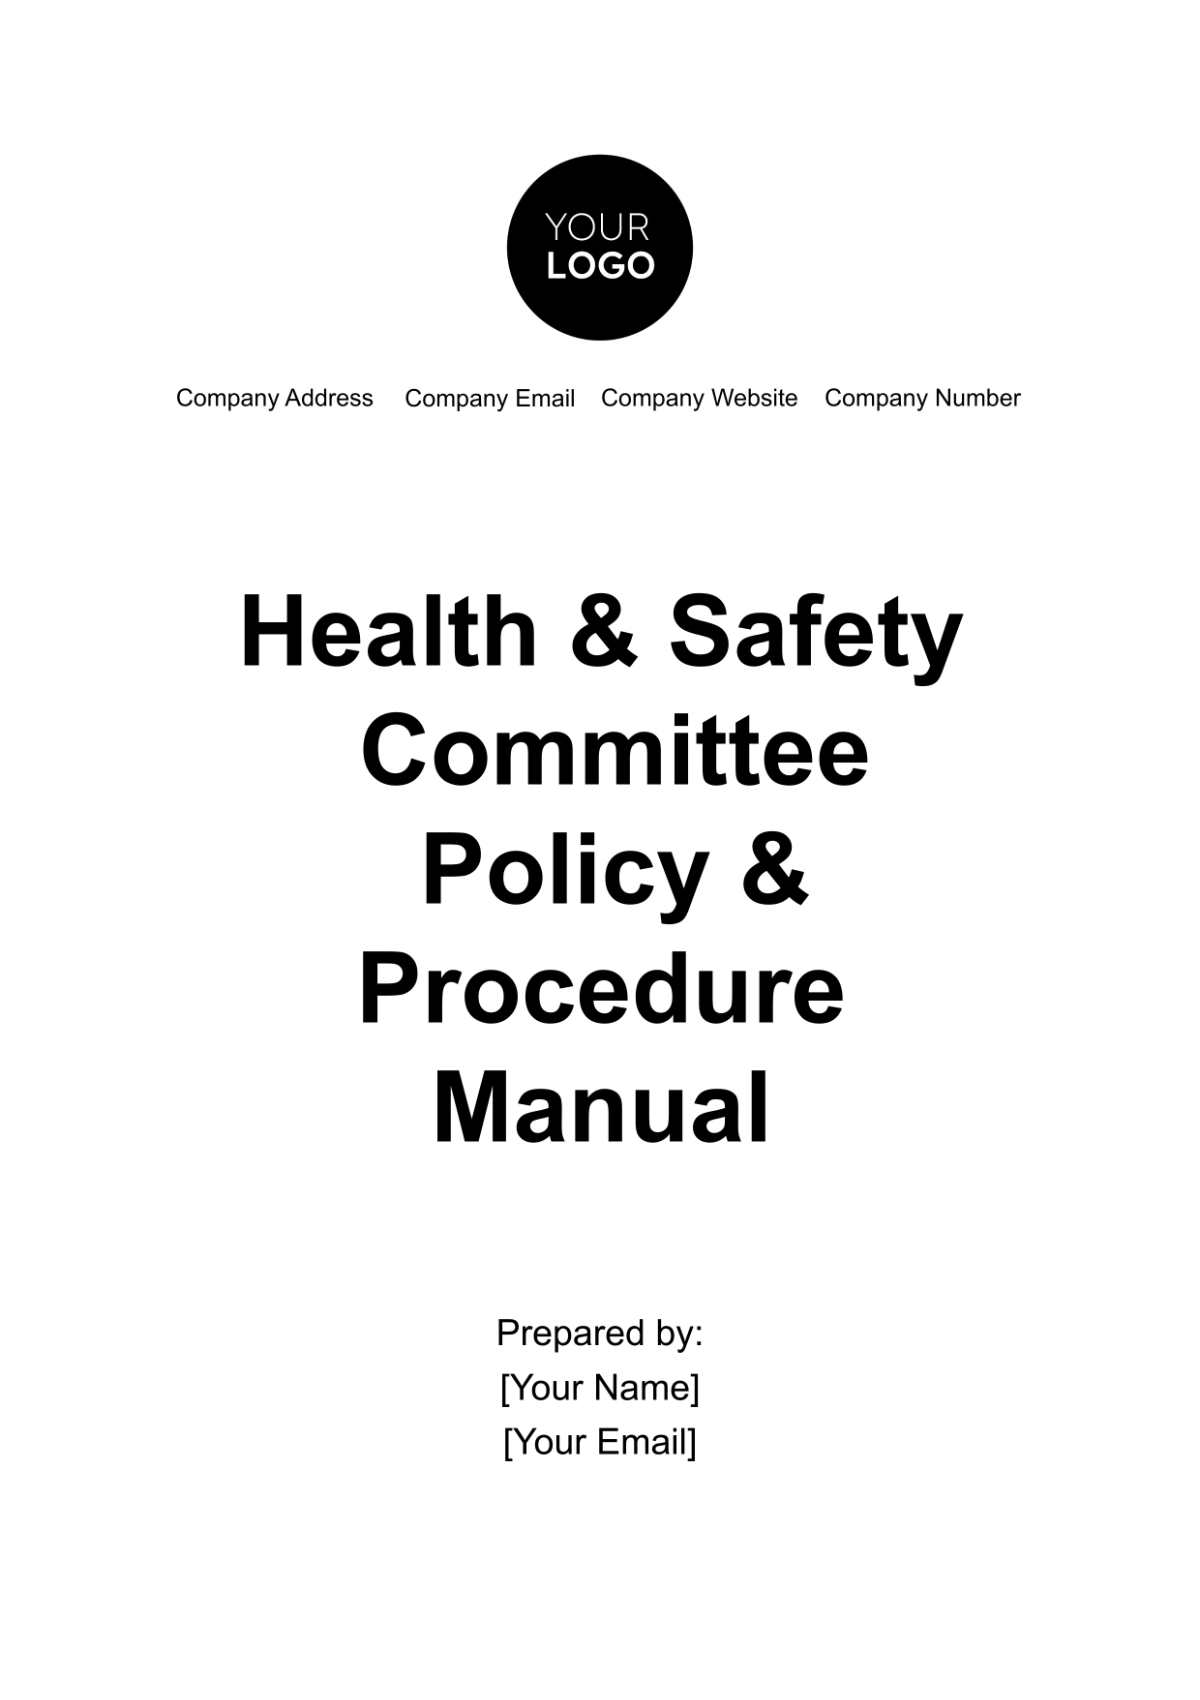 Free Health & Safety Committee Policy & Procedure Manual Template